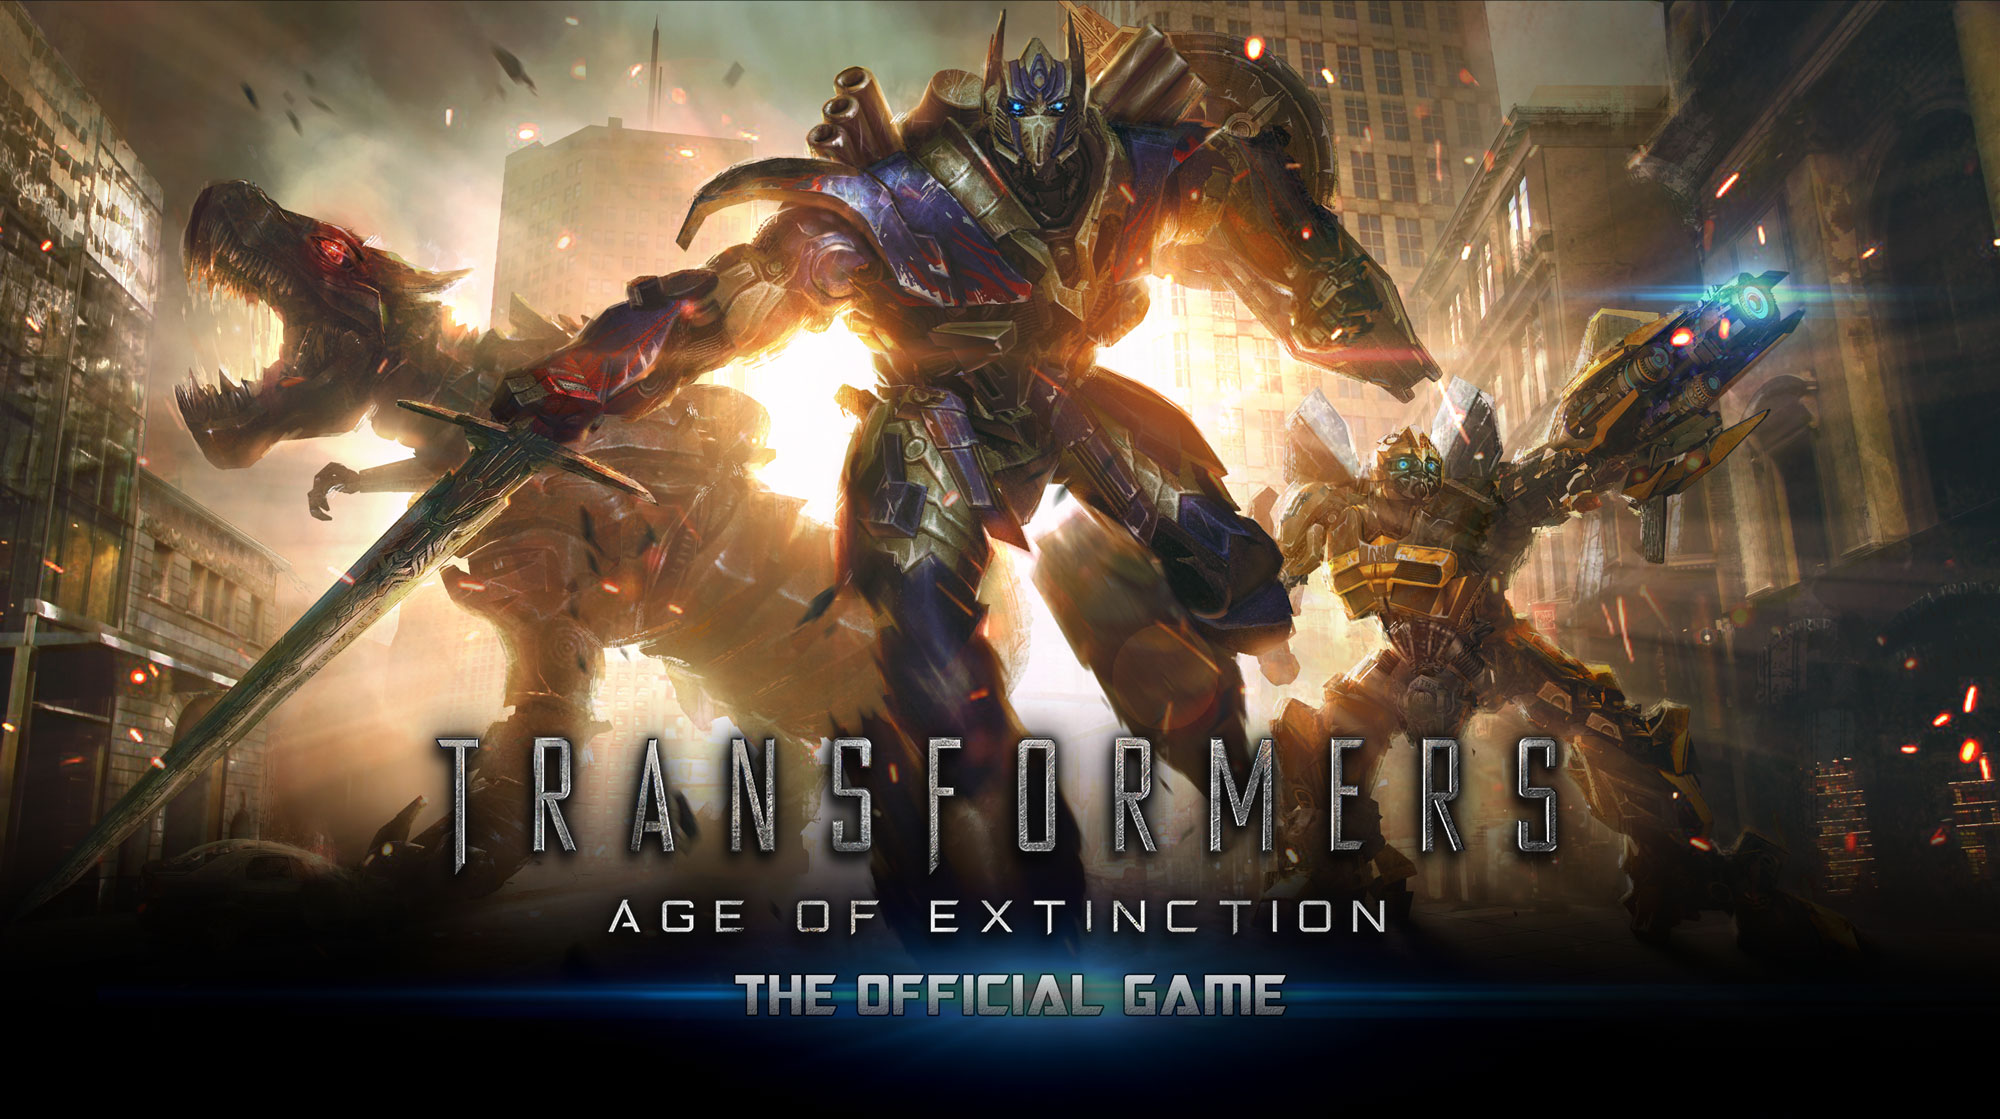 Transformers News: DeNA and Hasbro Announce TRANSFORMERS: AGE OF EXTINCTION for Mobile is Coming Soon